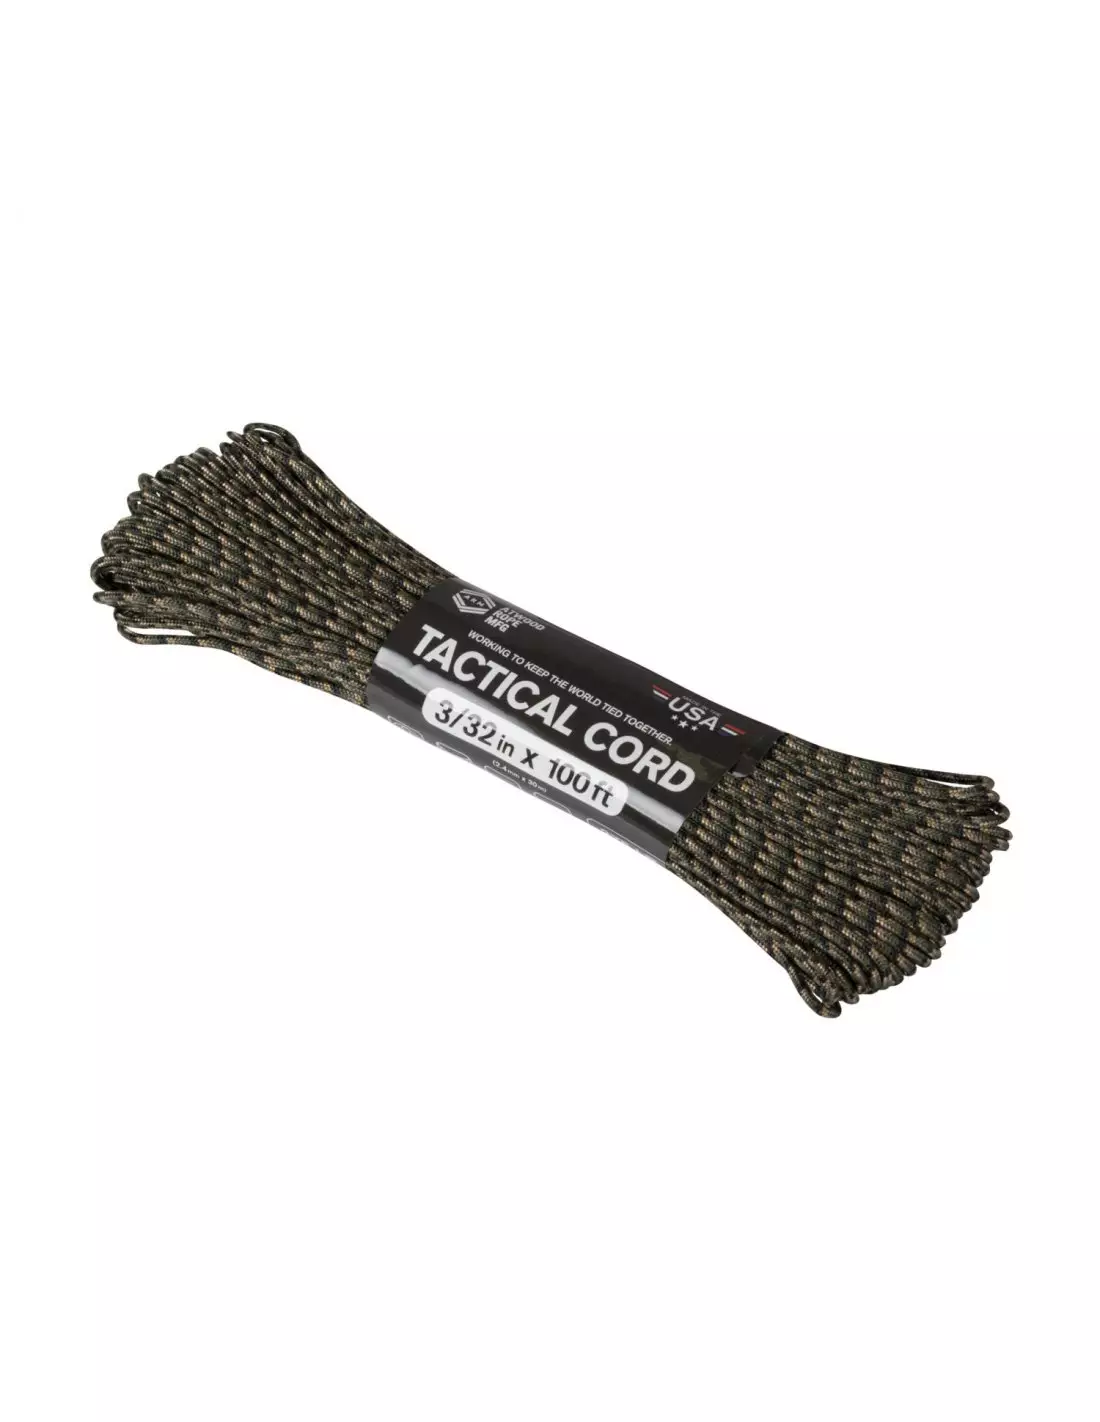 Atwood® Tactical 275 Cord (100FT) - Forest Camo